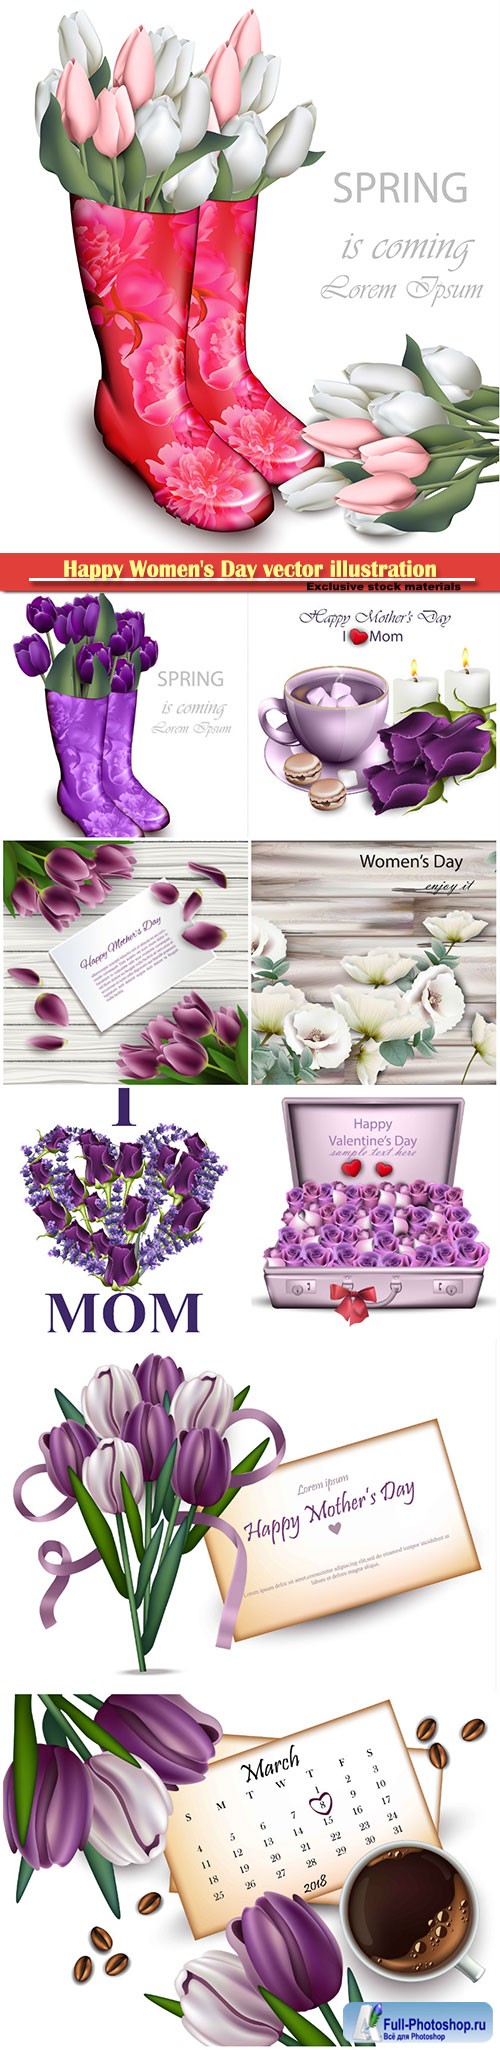 Happy Women's Day vector illustration,8 March, spring flower background # 9